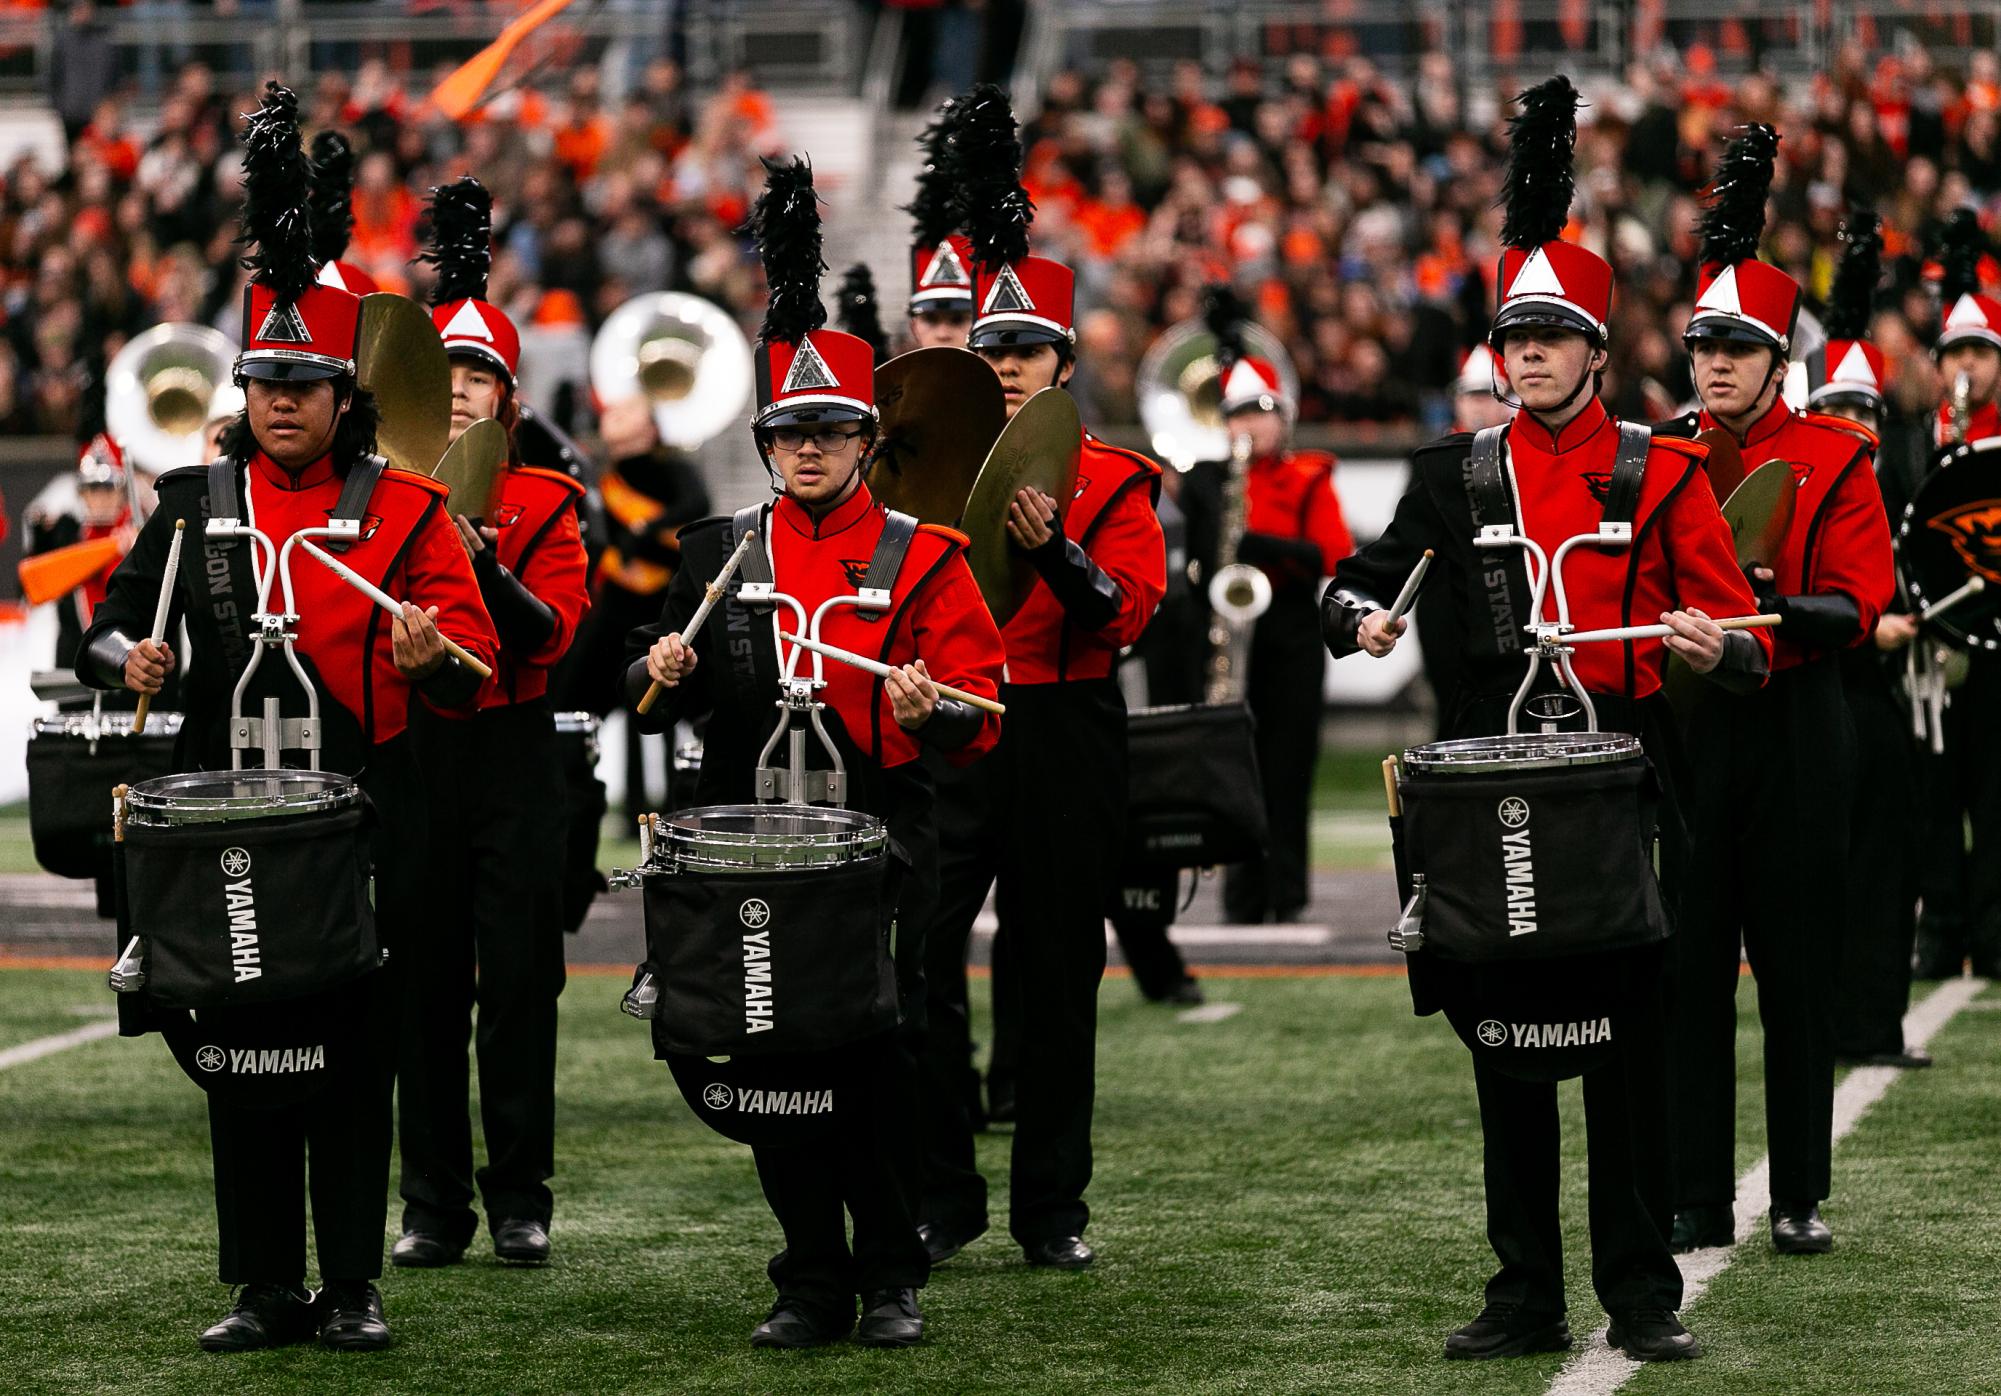  Oregon State University’s marching band, also known as the Spirit and Sound of OSU, performing during halftime at the OSU football game on November 11, 2023 at Reser Stadium. The band performed some featured songs from Avatar: The Last Airbender.